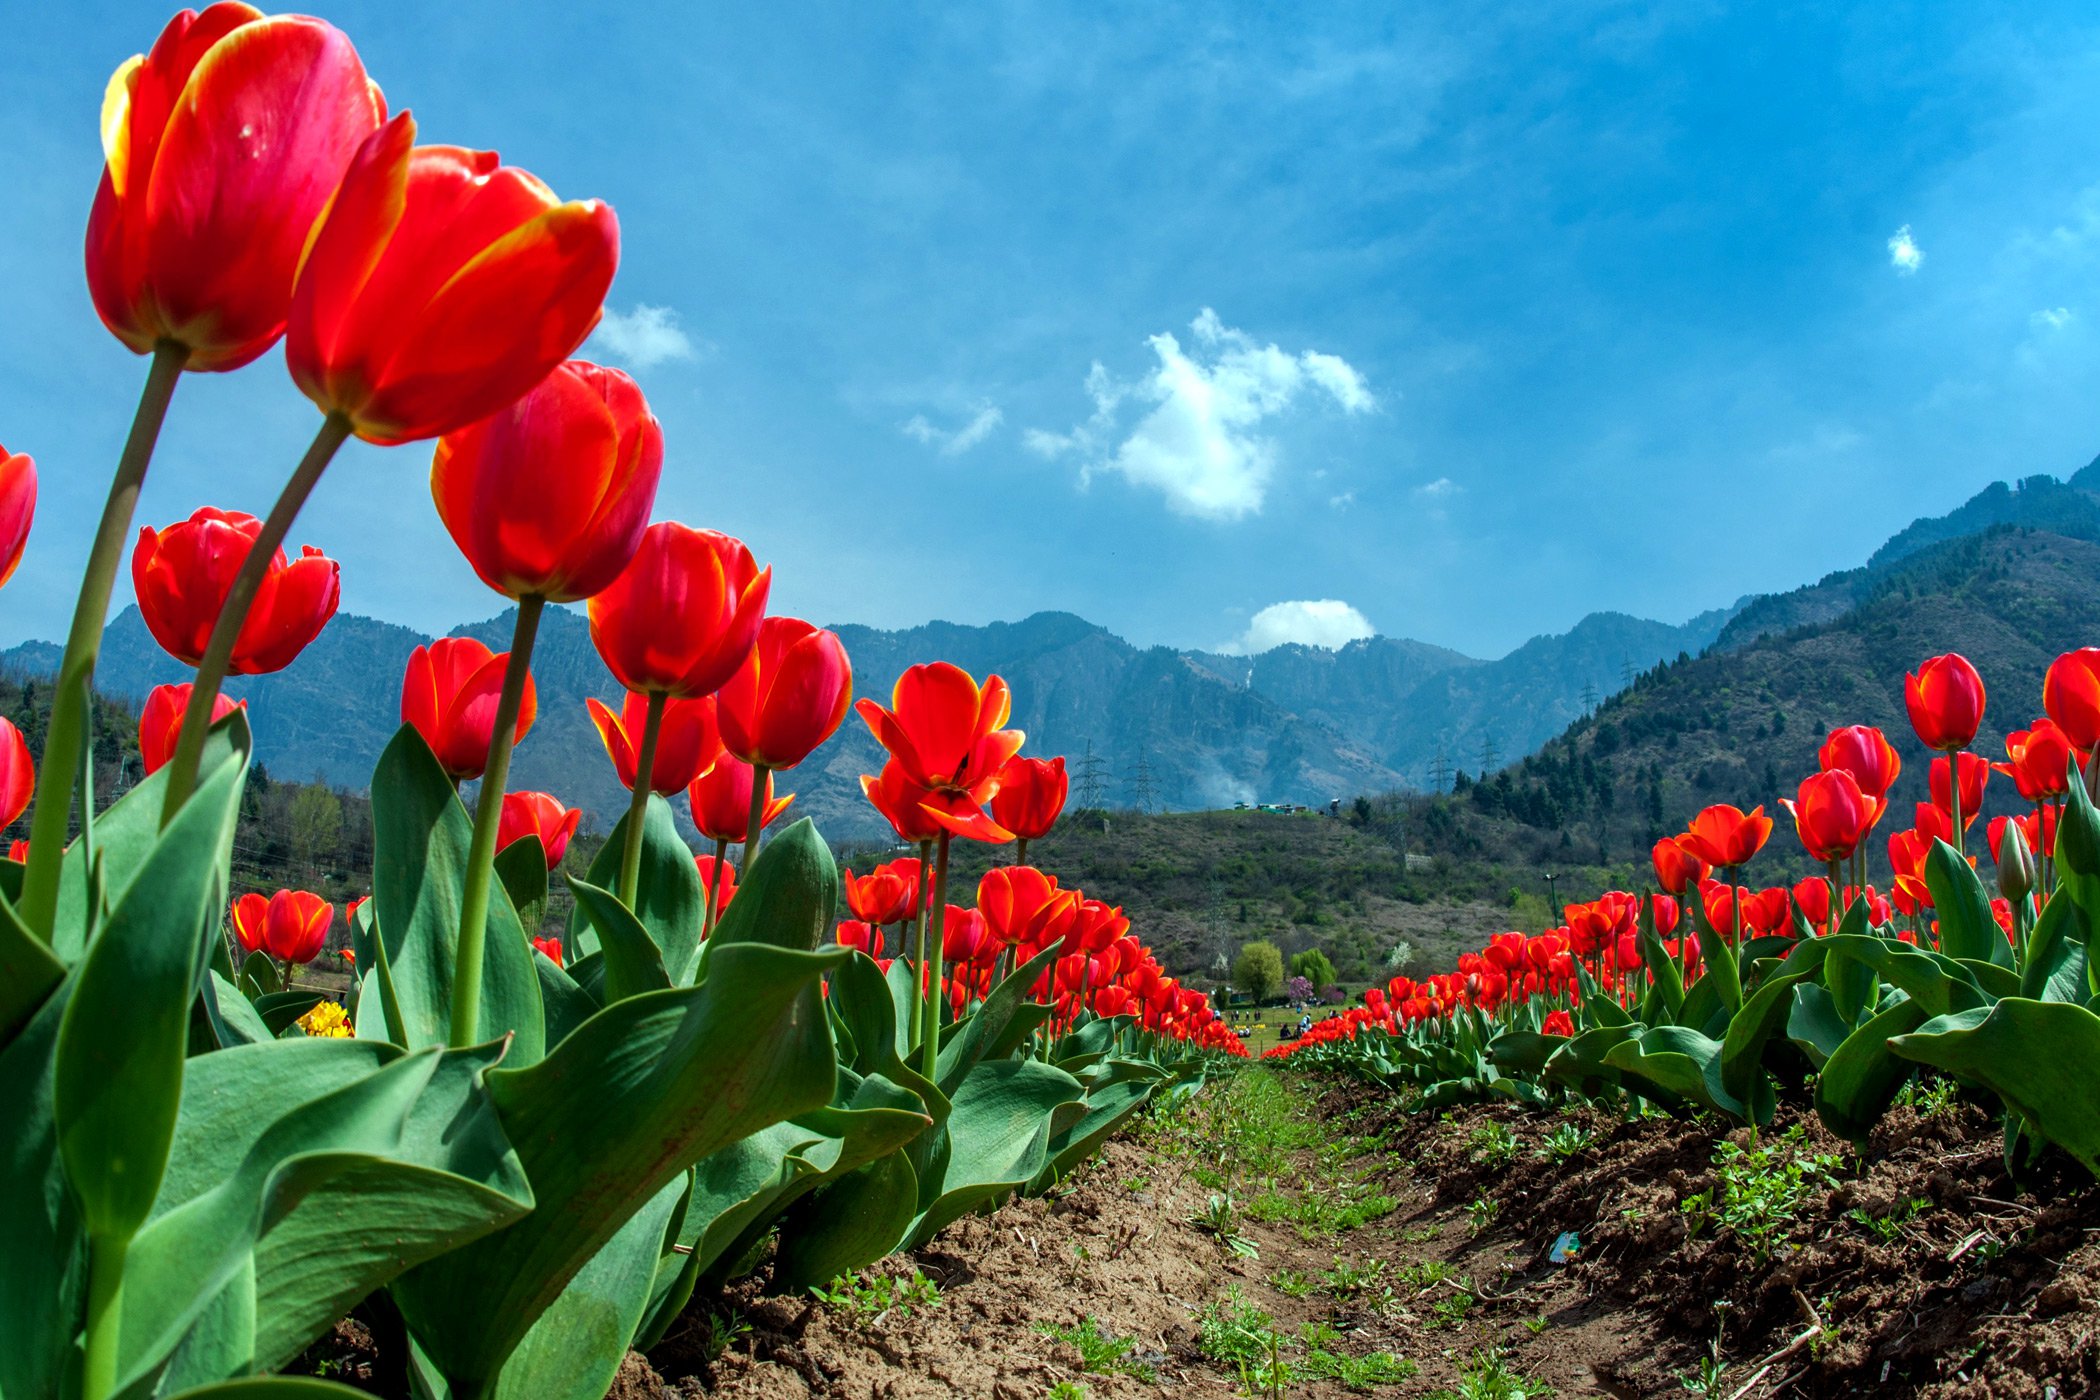 See Asia's Largest Tulip Garden in Full Bloom | Time.com